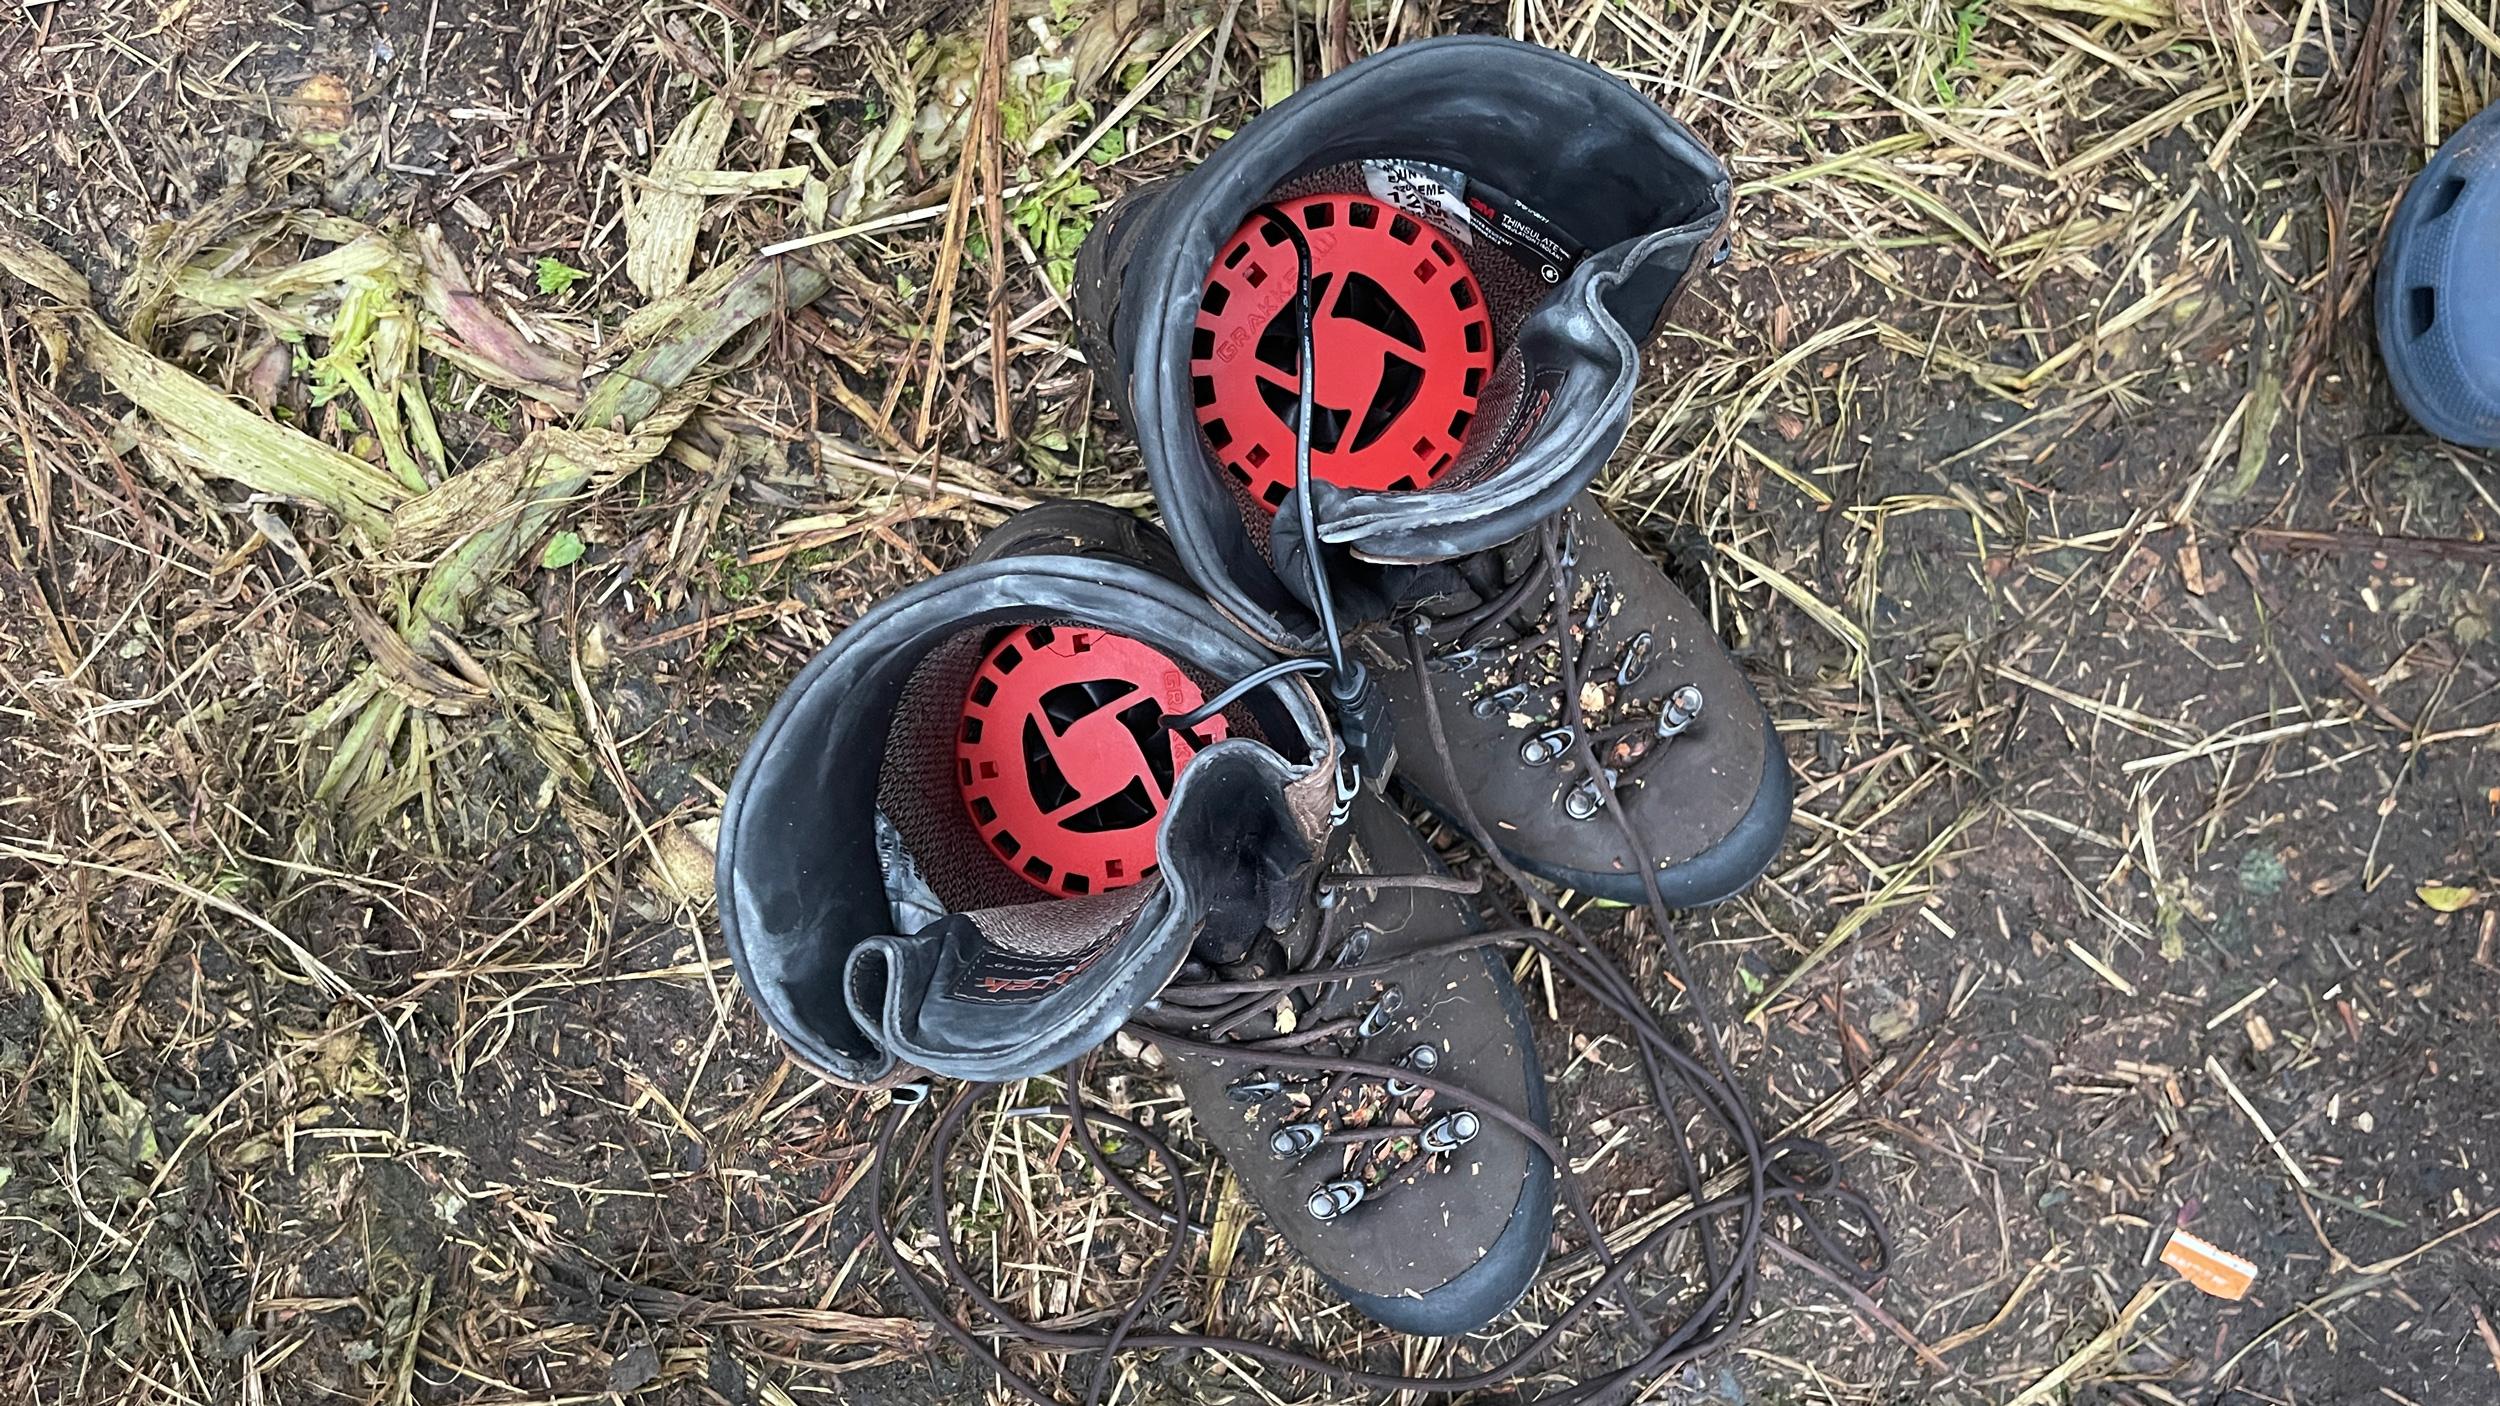 Using Grakksaw backcountry boots dryers on a hunt